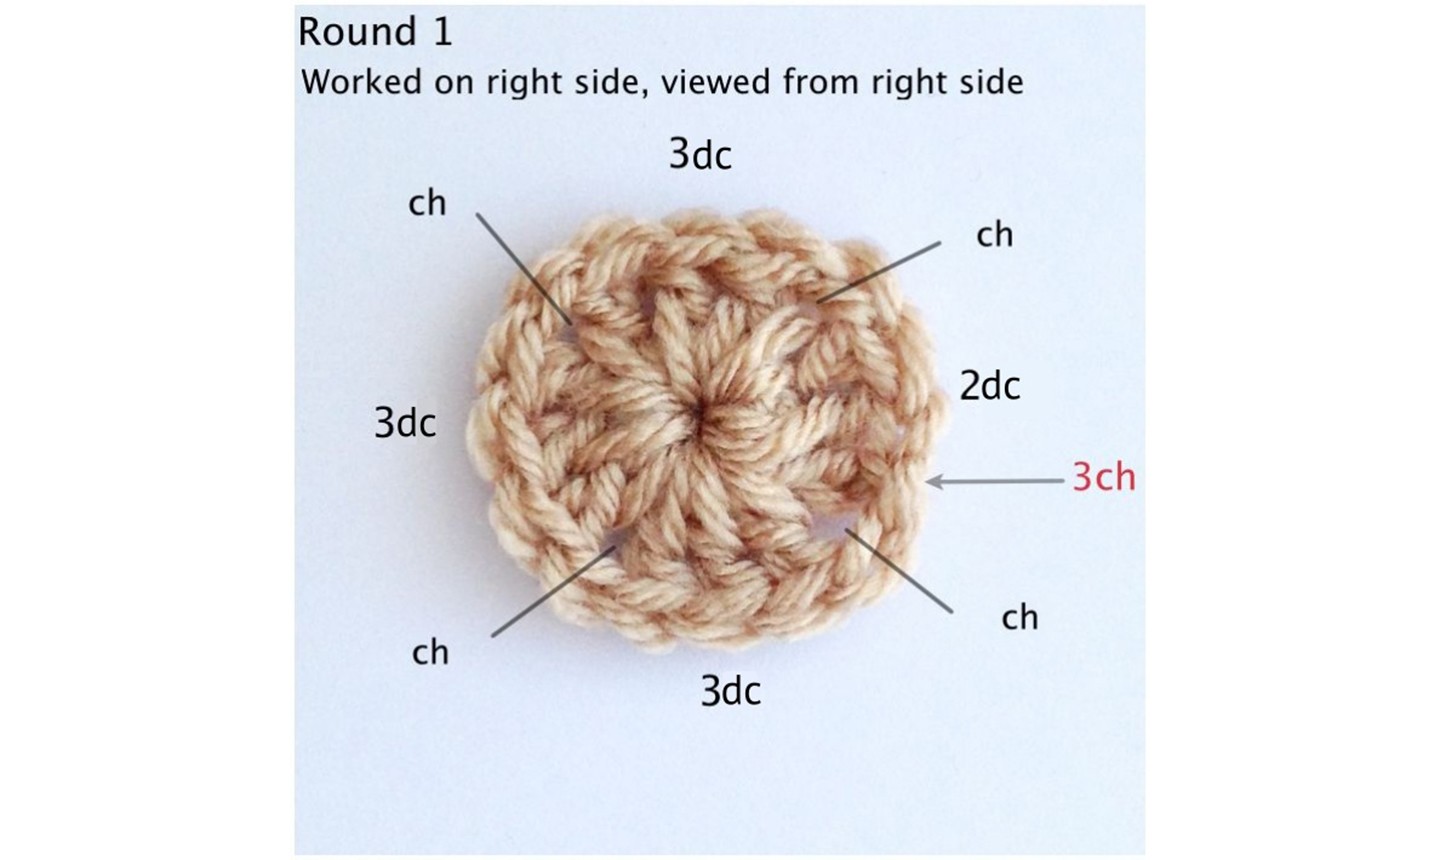 Here's What You Need to Read Any Crochet Pattern